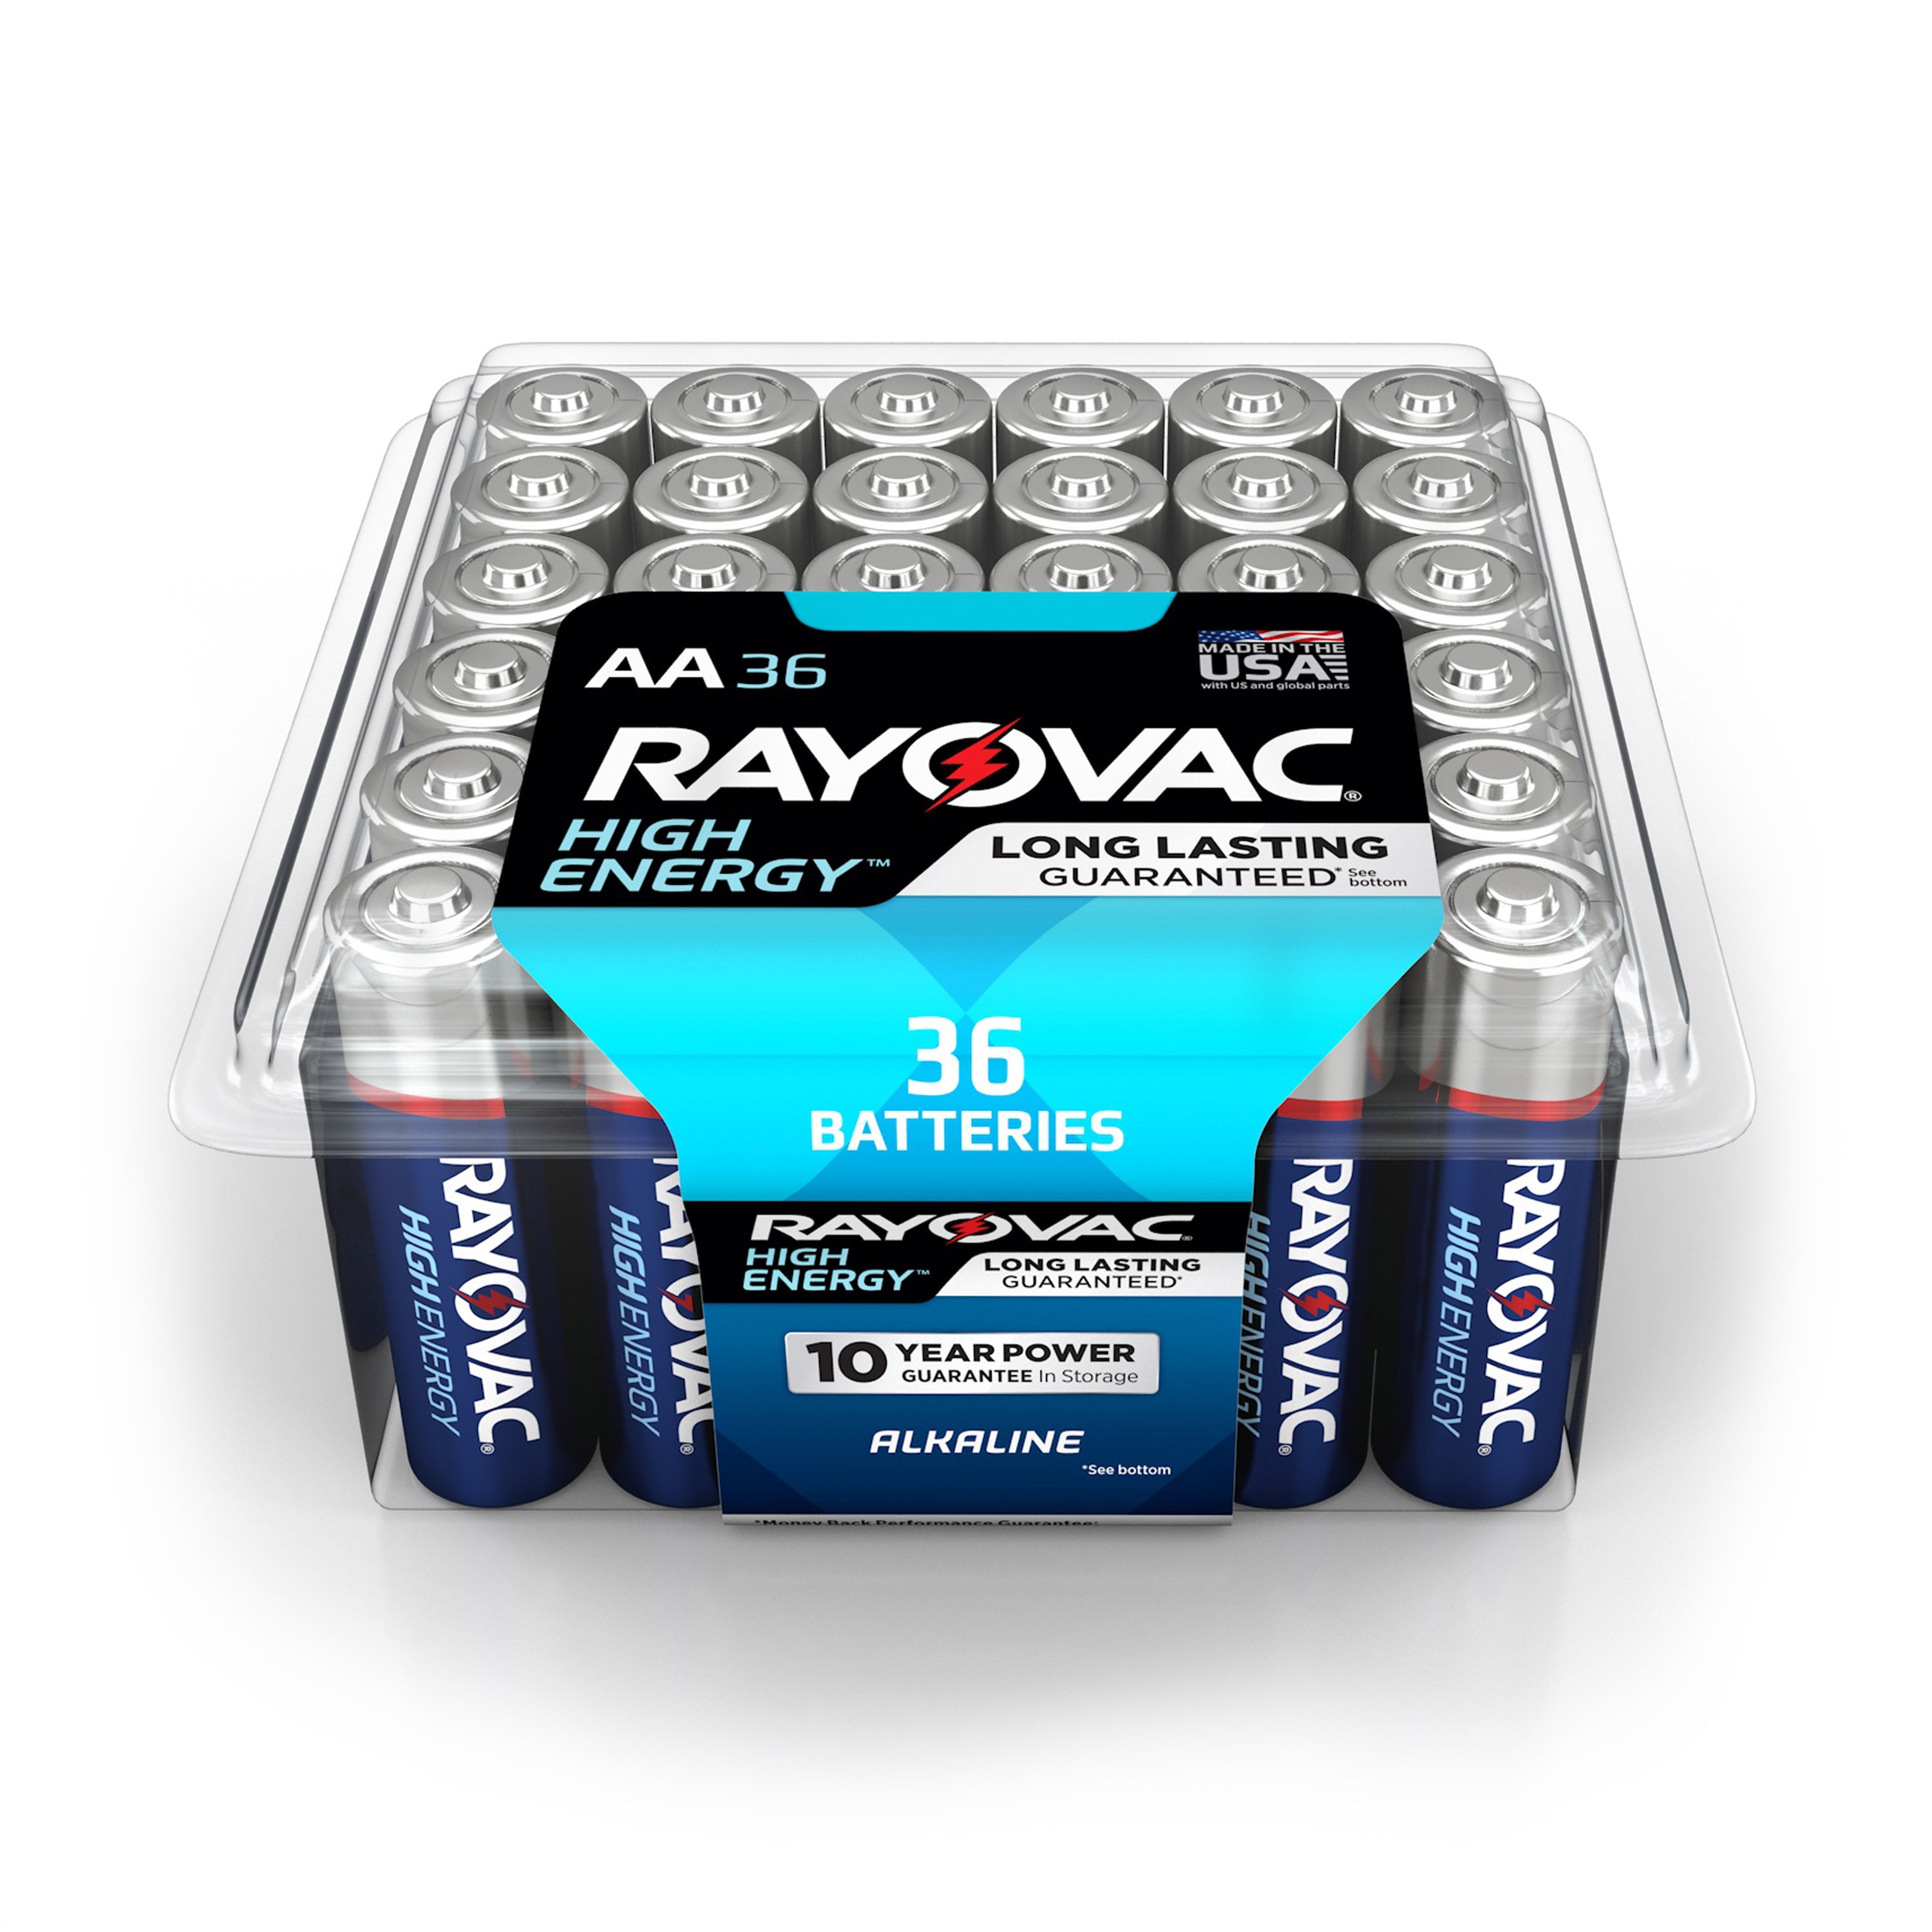 are rayovac batteries as good as energizer